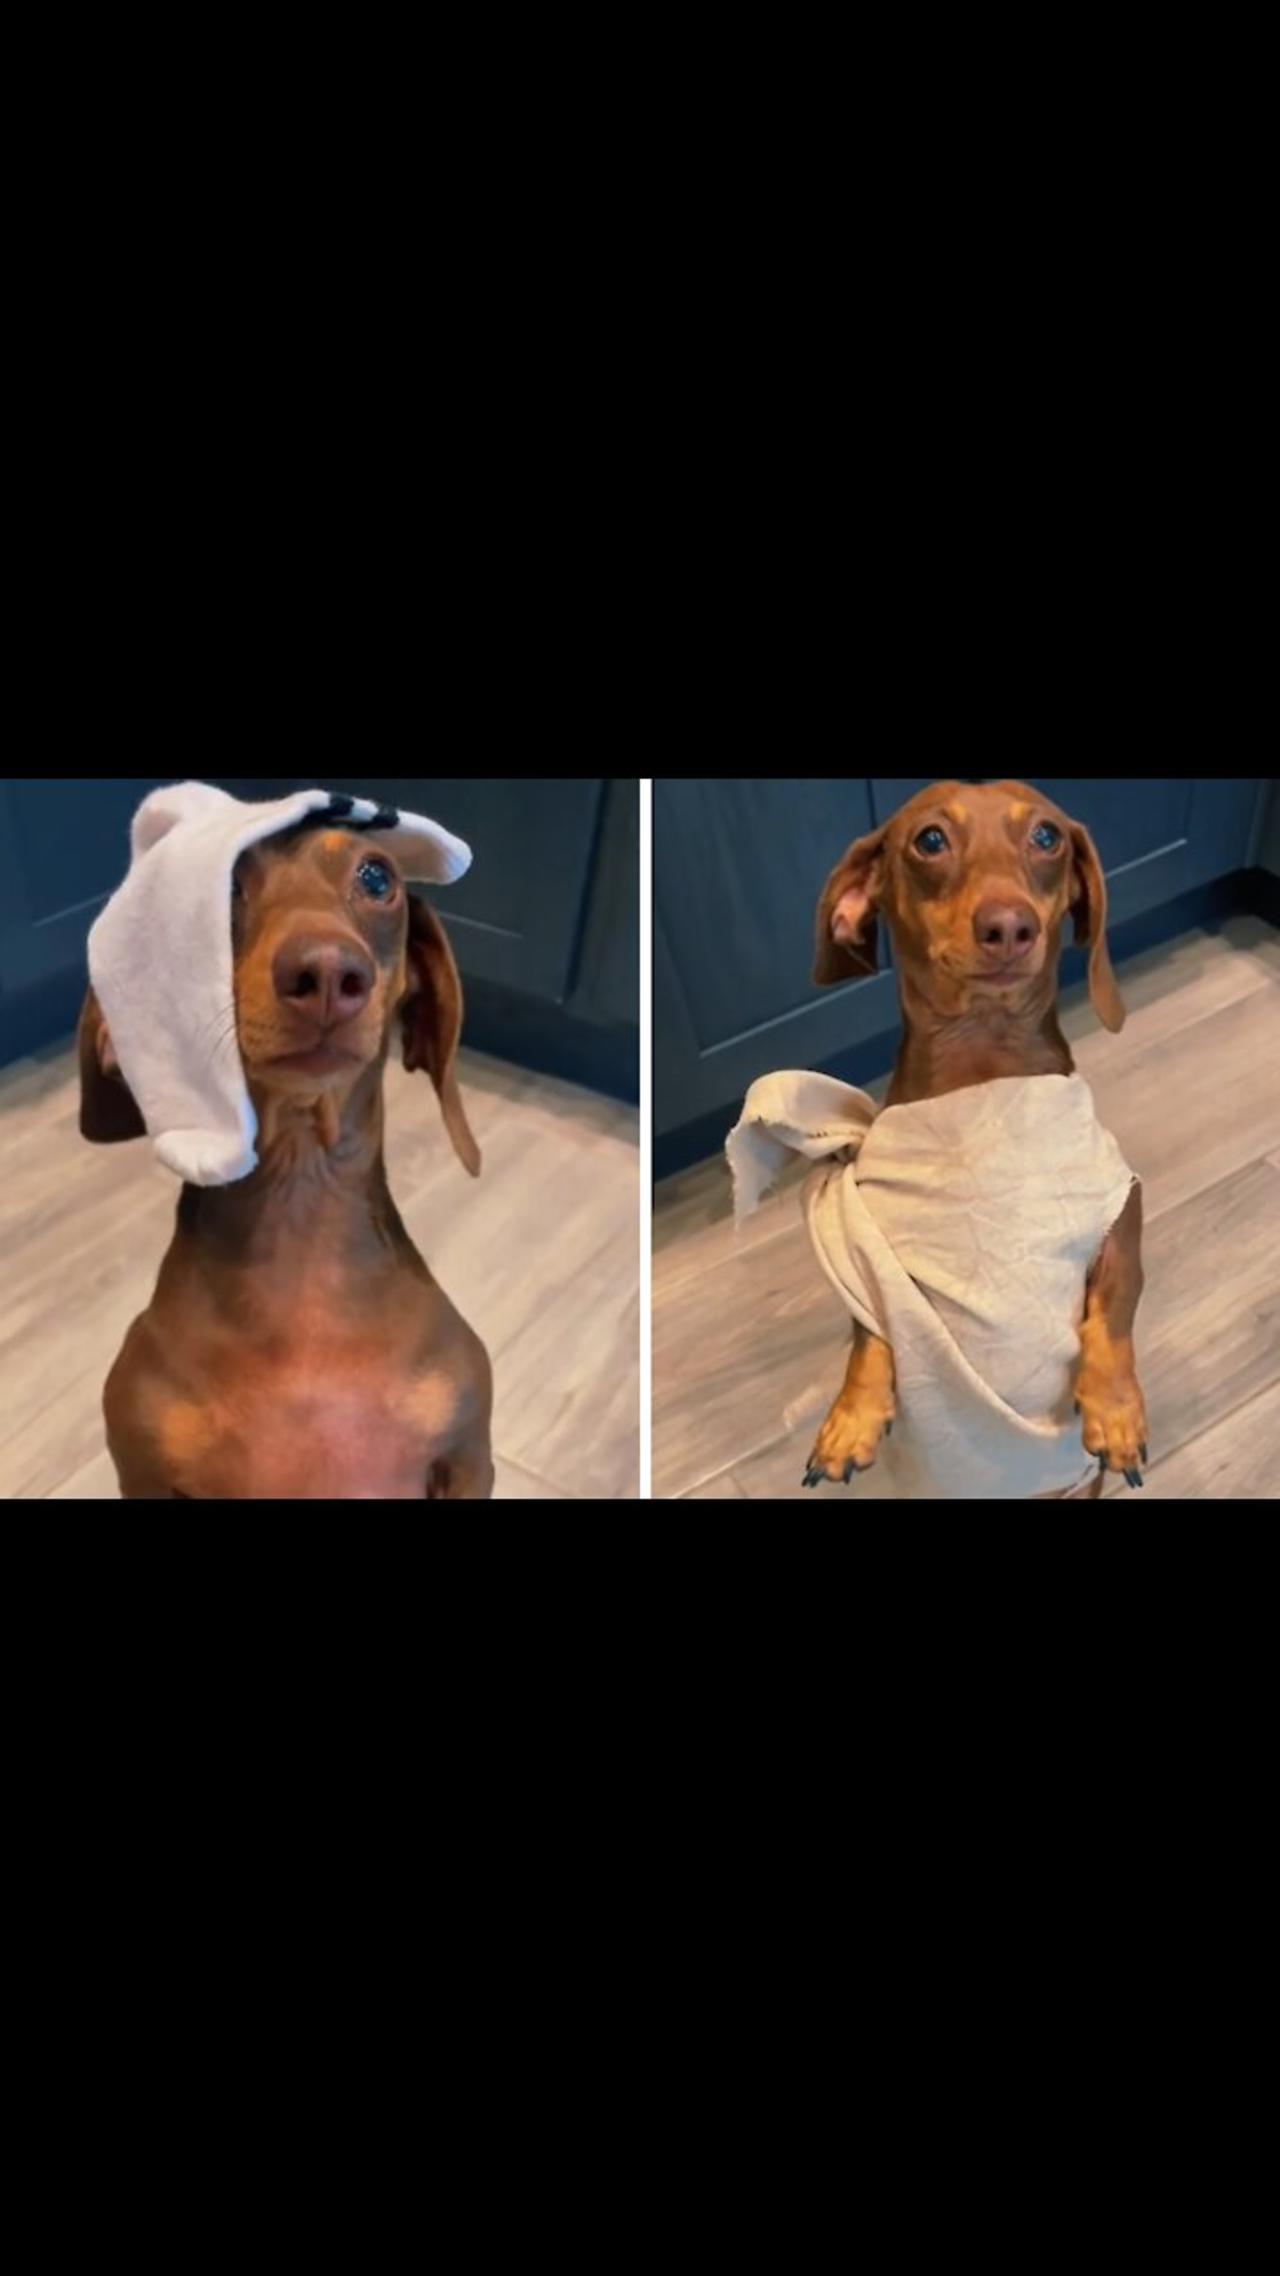 Pup pulls off flawless impression of Dobby from 'Harry Potter'